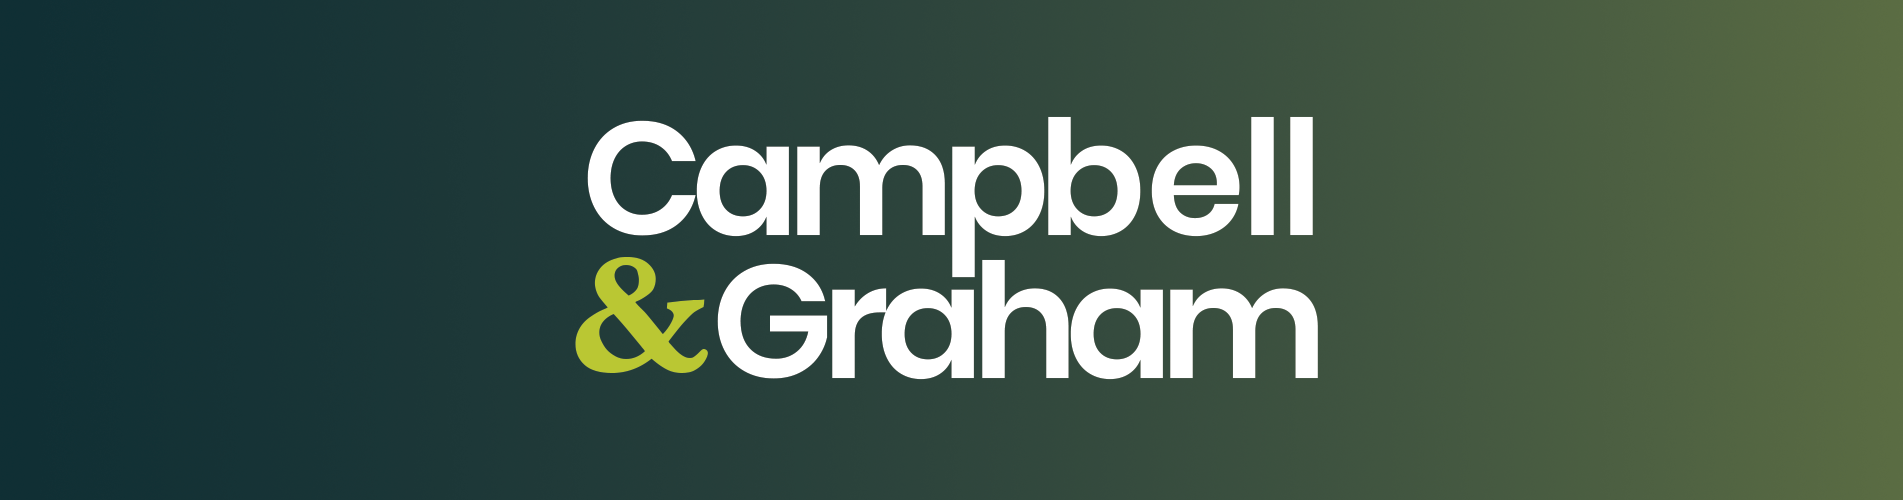 Our work with Campbell & Graham